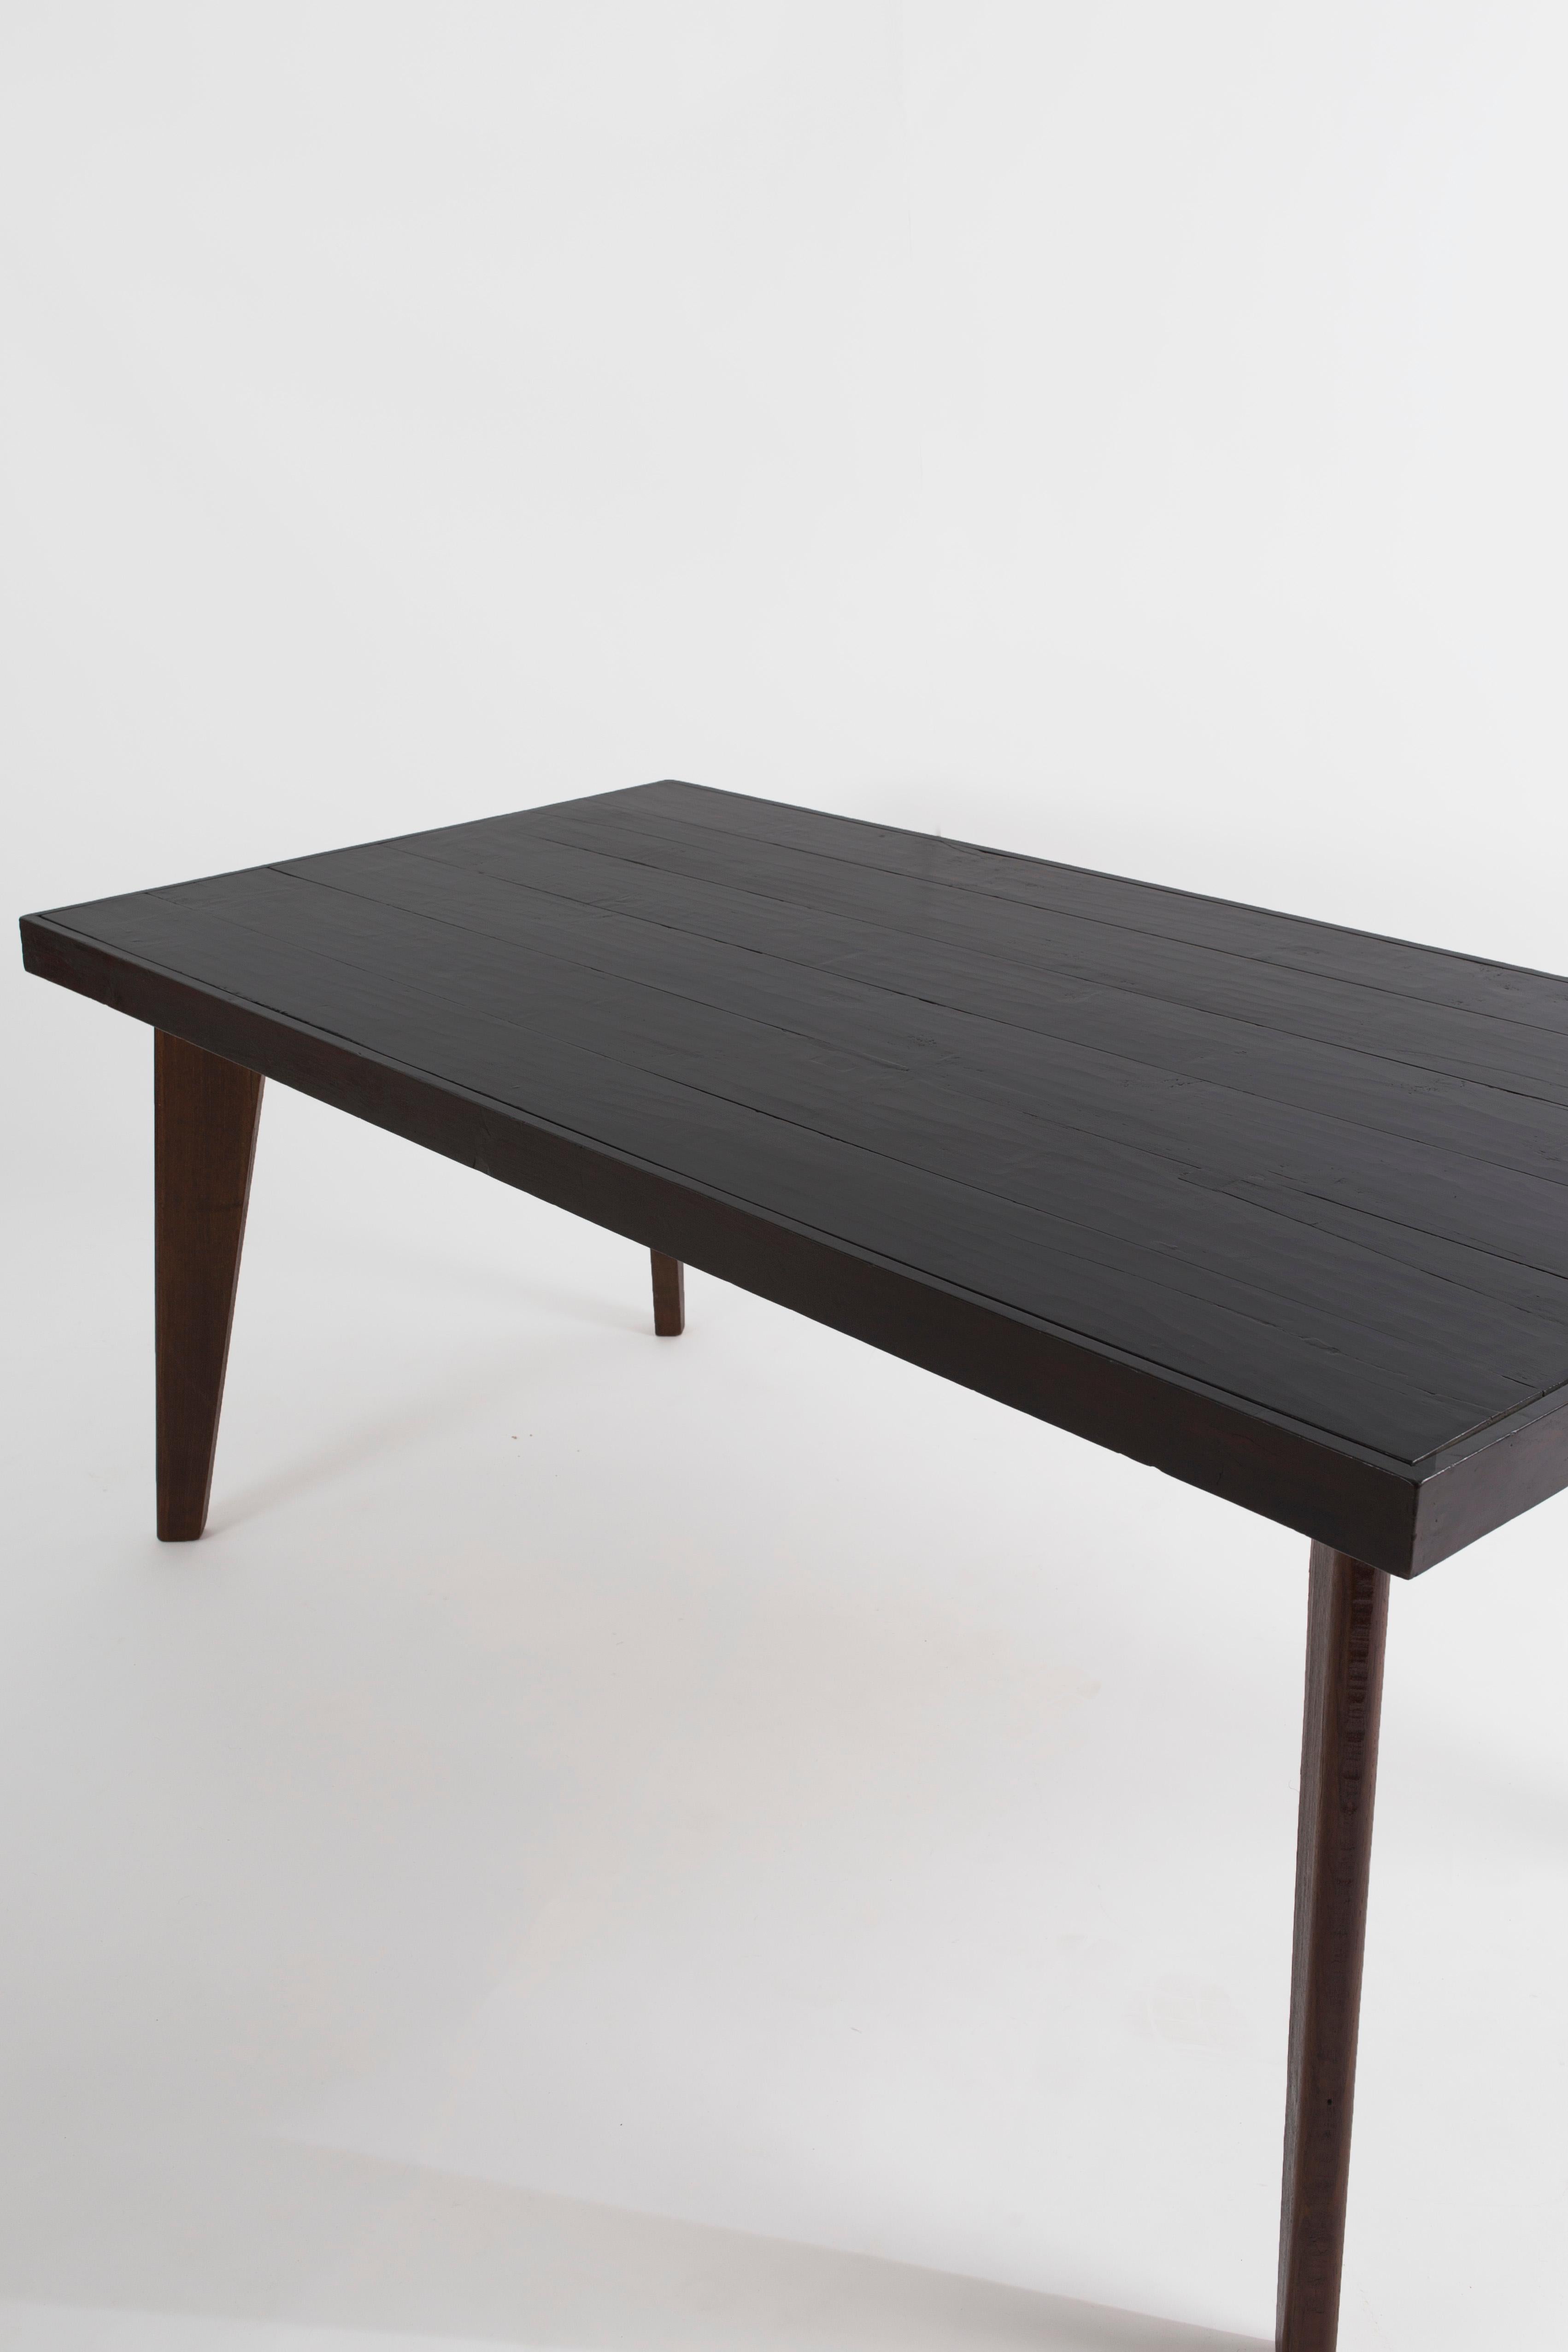 Pierre Jeanneret Cafeteria Table in Solid Teak, Ebony Stained, circa 1960

Provenance: Private Residences, Cafeteria PGI, Punjab University, Chandigarh, Inda.